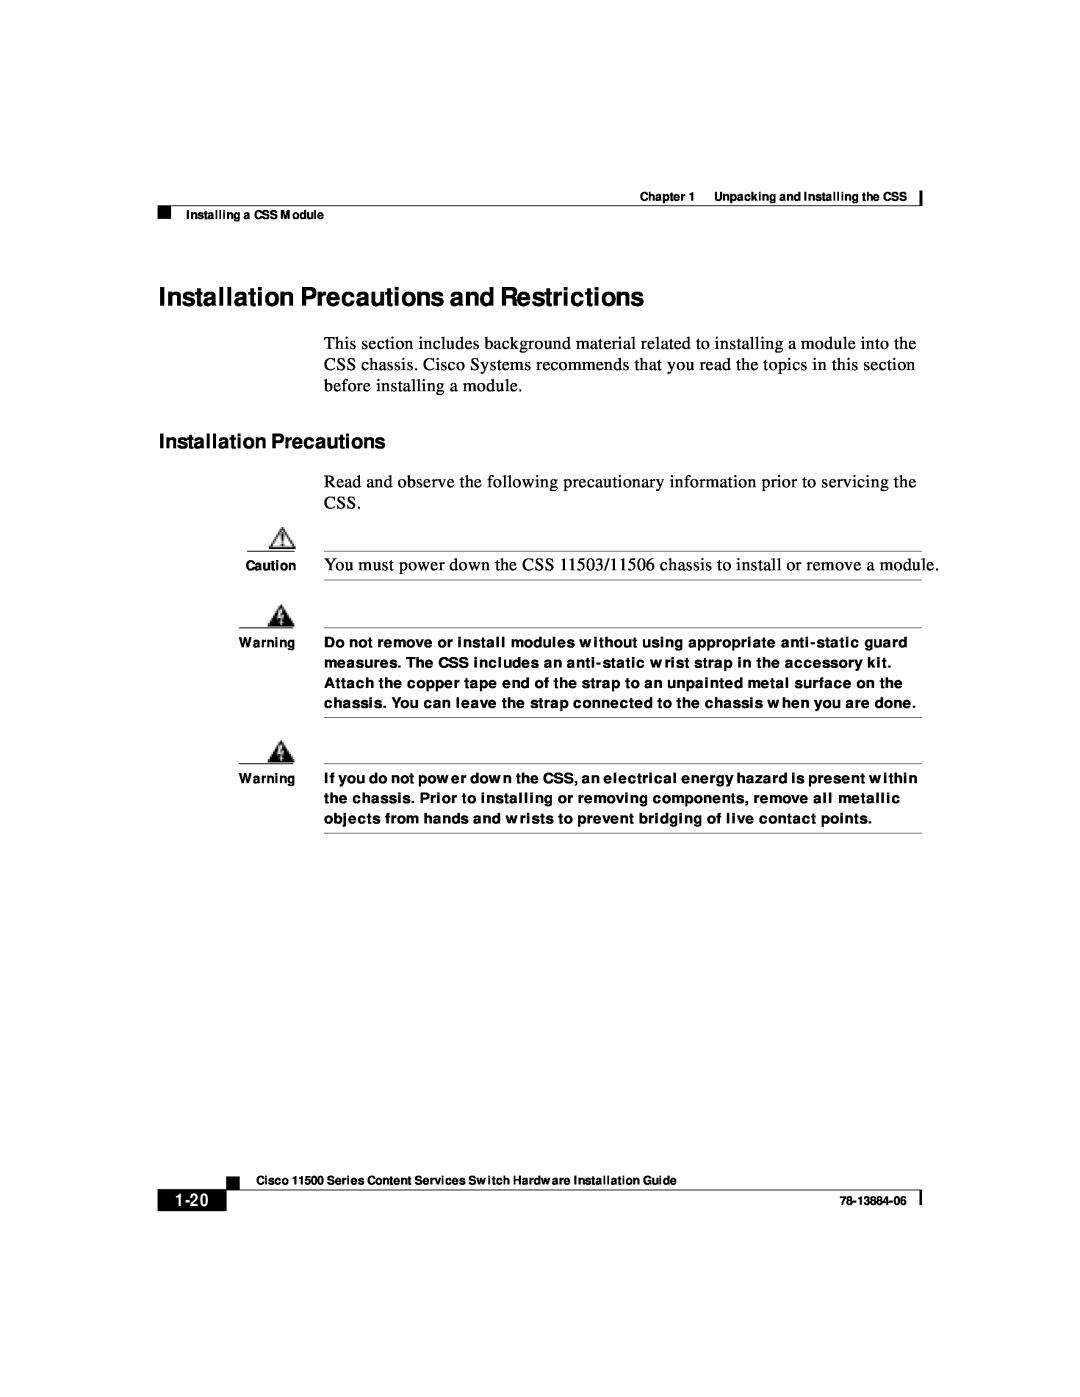 Cisco Systems 11500 Series manual Installation Precautions and Restrictions, 1-20 